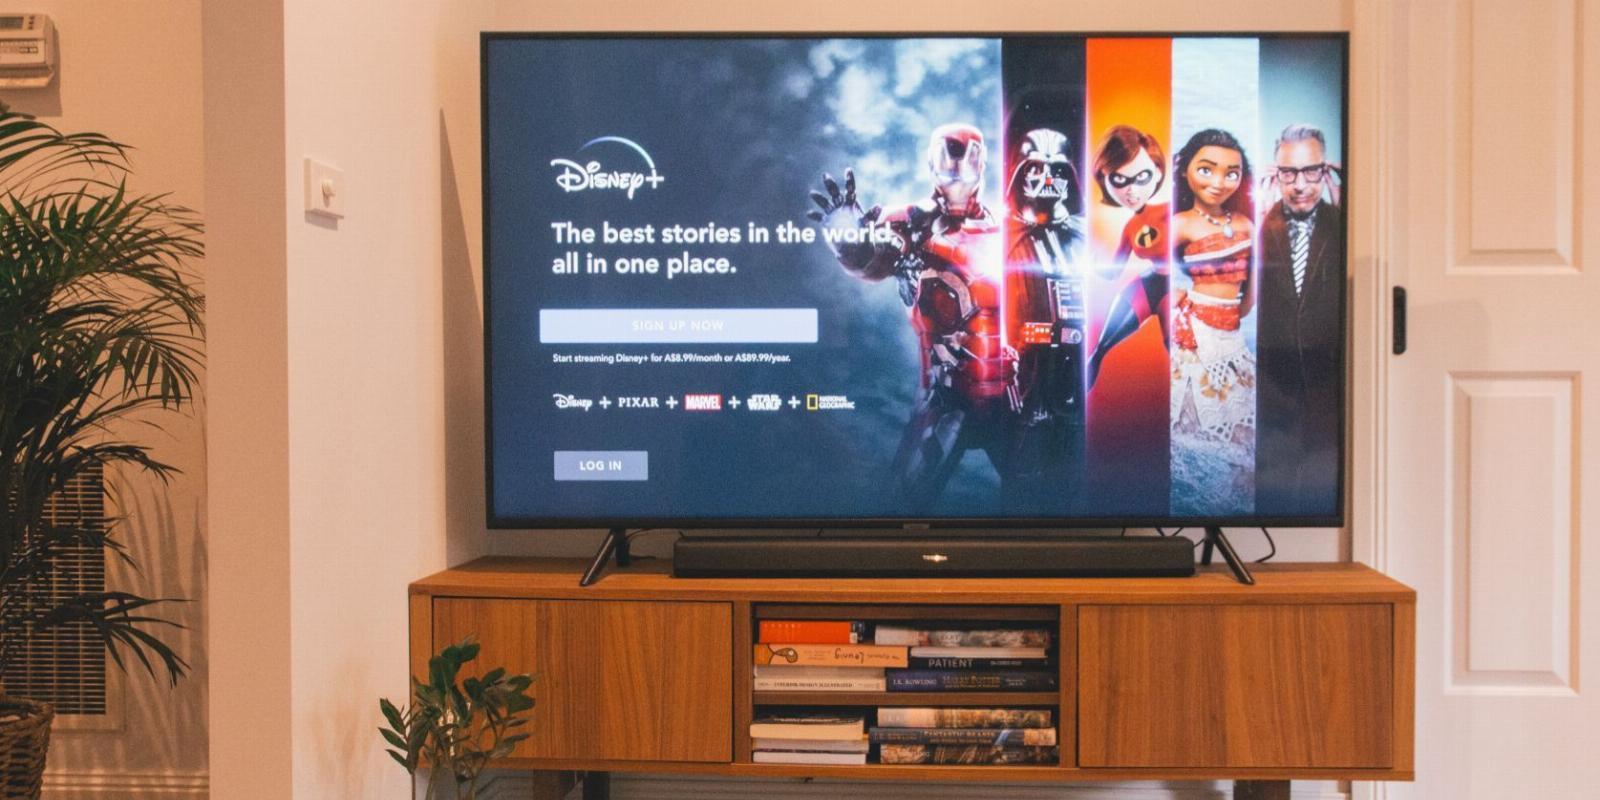 Disney+ Autoplay: How to Enable and Disable the Feature